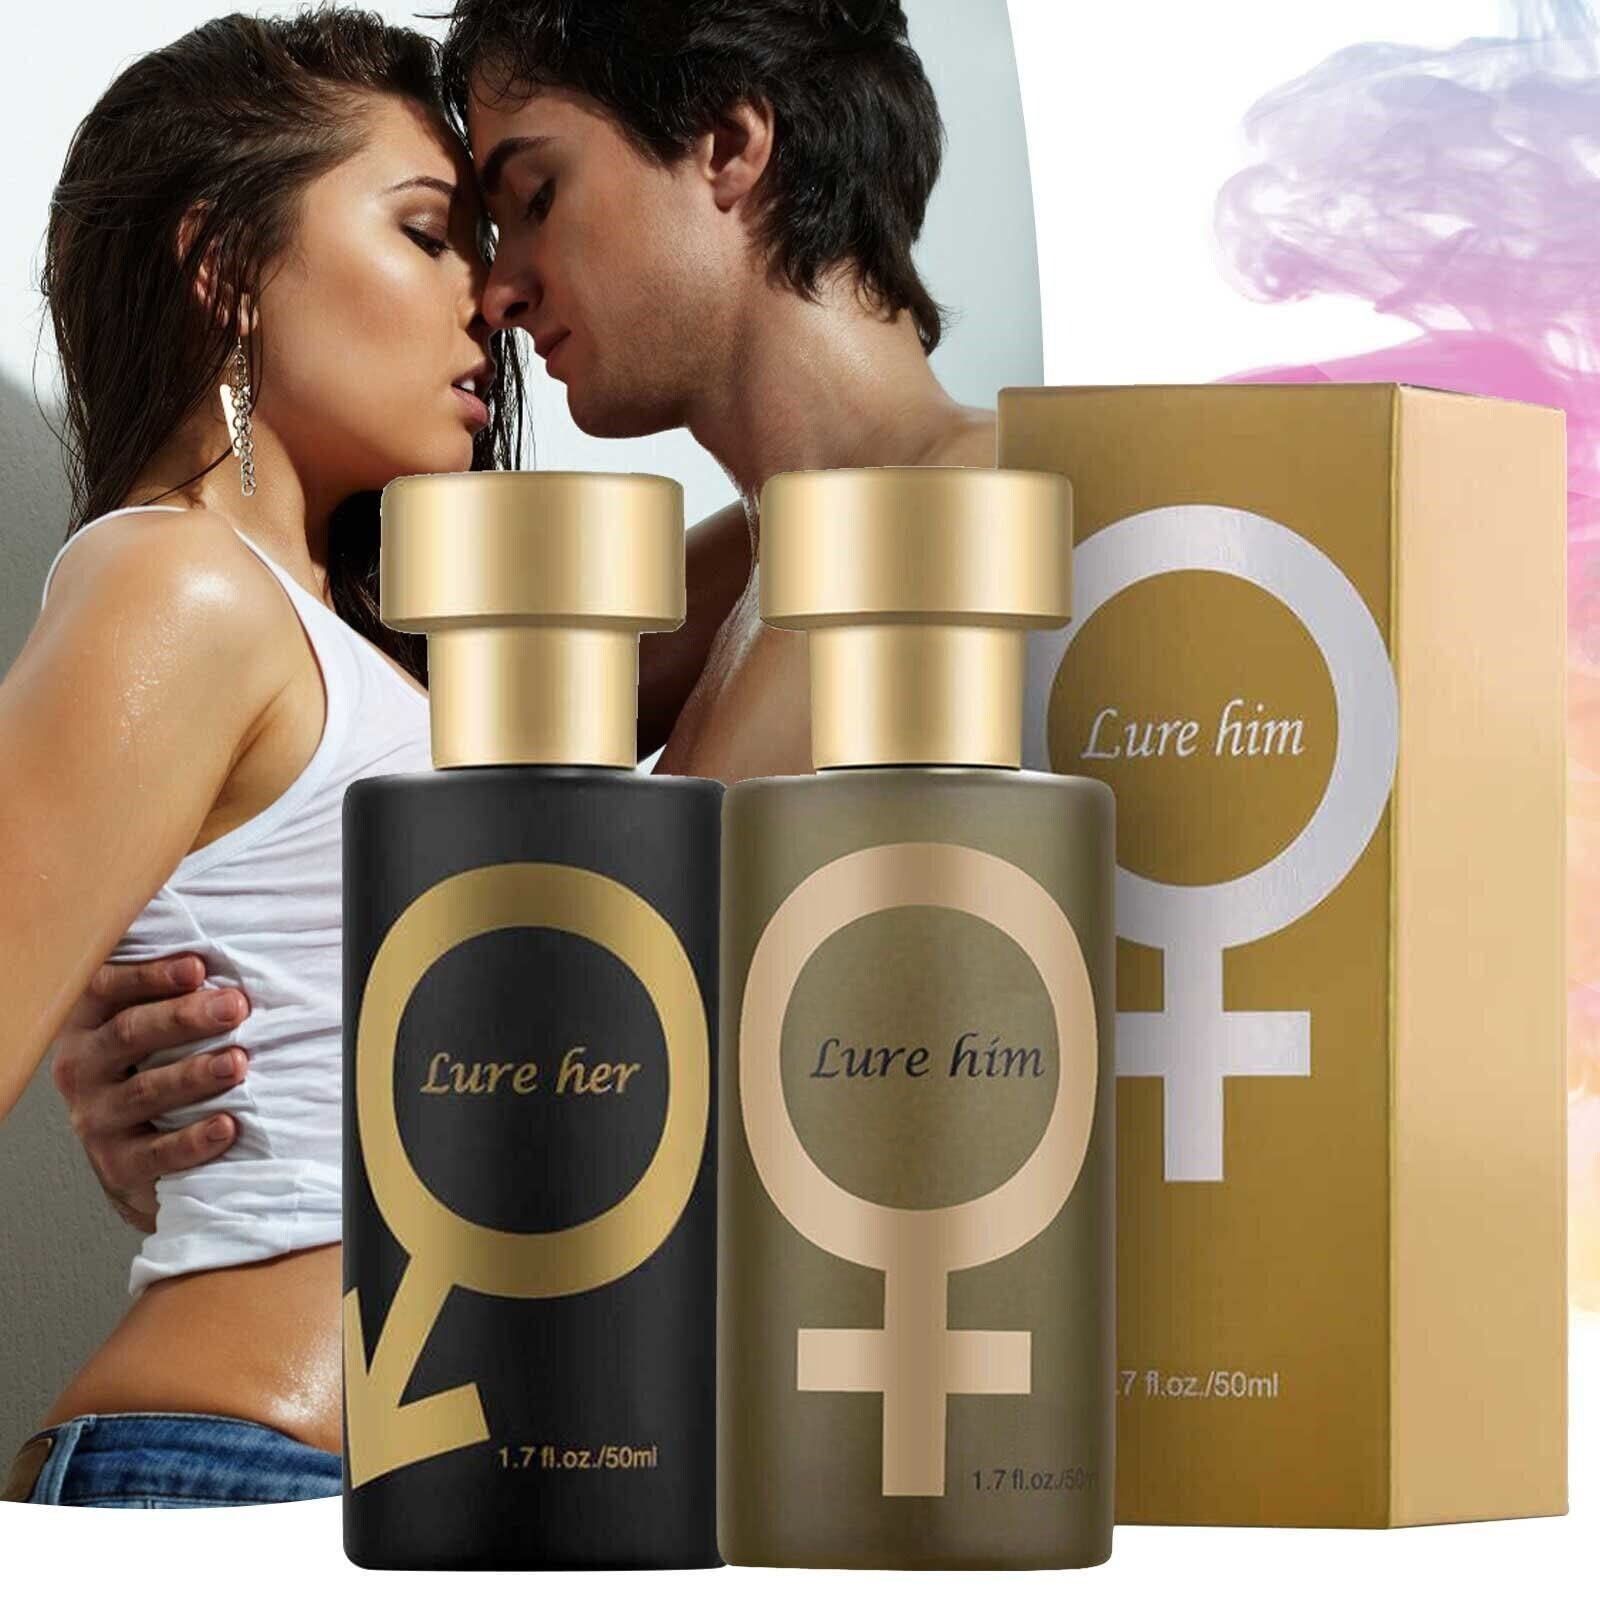 Lure Her Perfume for Men,Lure Her Cologne for Men,Lure Her Perfume  Pheromones for Men,Lure for Her Pheromone,Perfumes Para Hombres,Golden Lure  Pheromone Perfume